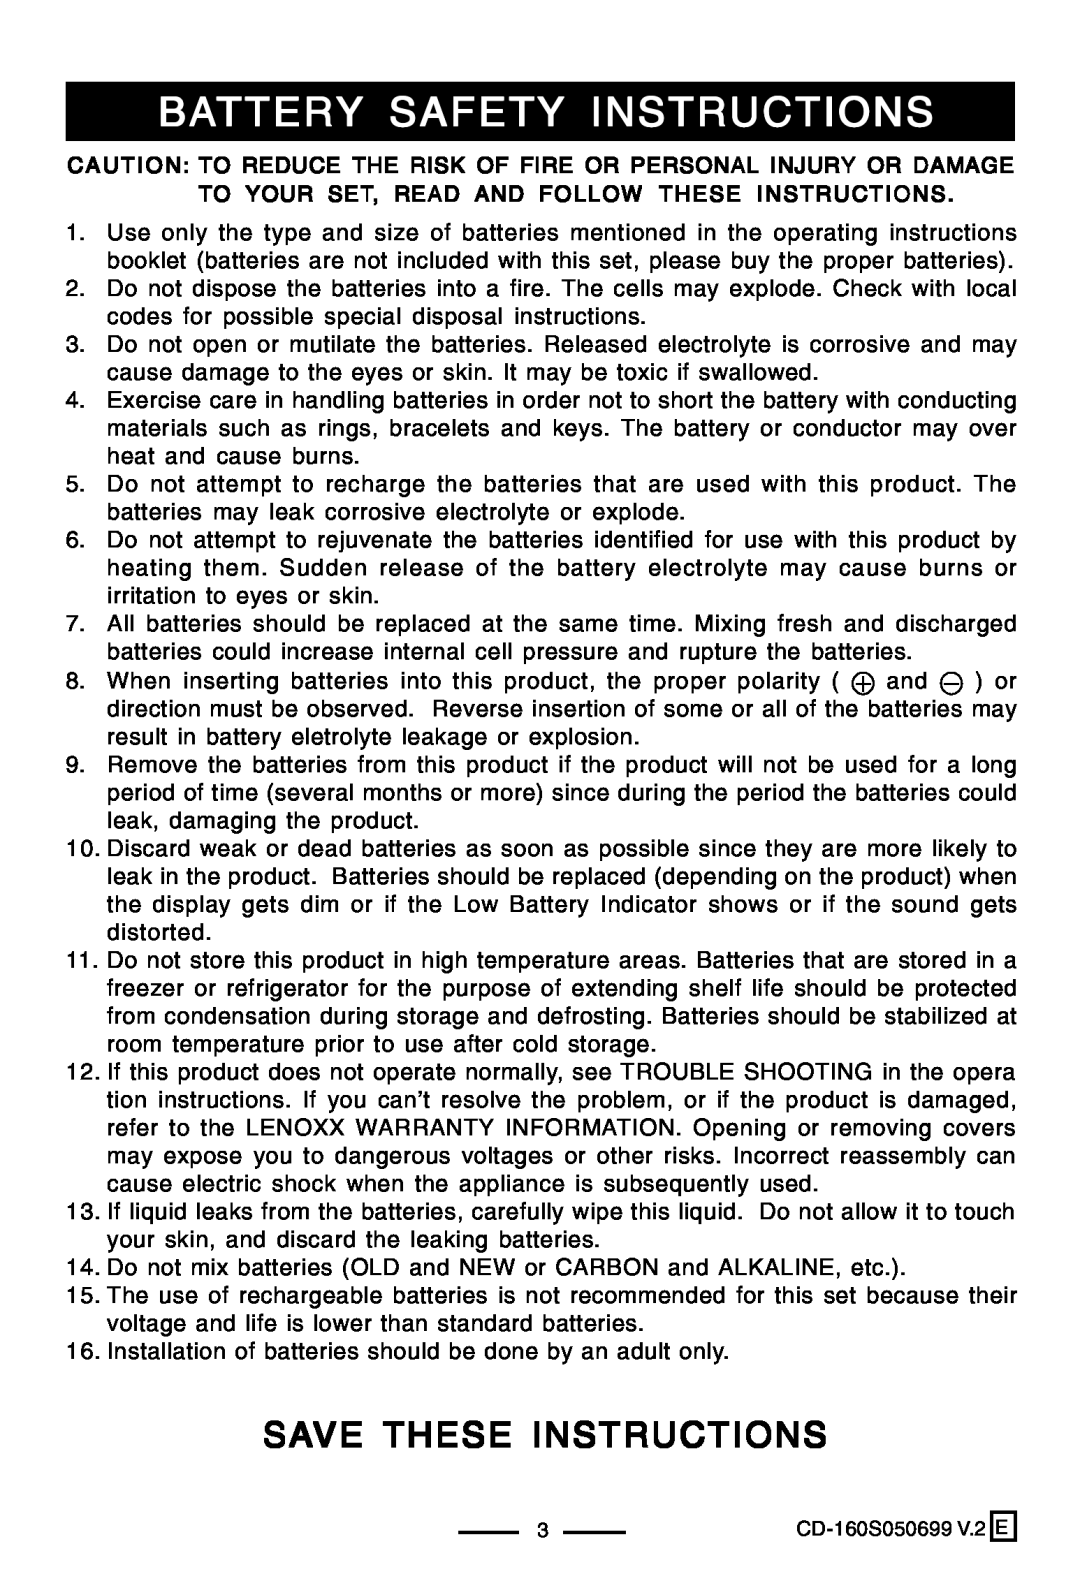 Lenoxx Electronics CD-160 manual Battery Safety Instructions, Save These Instructions 